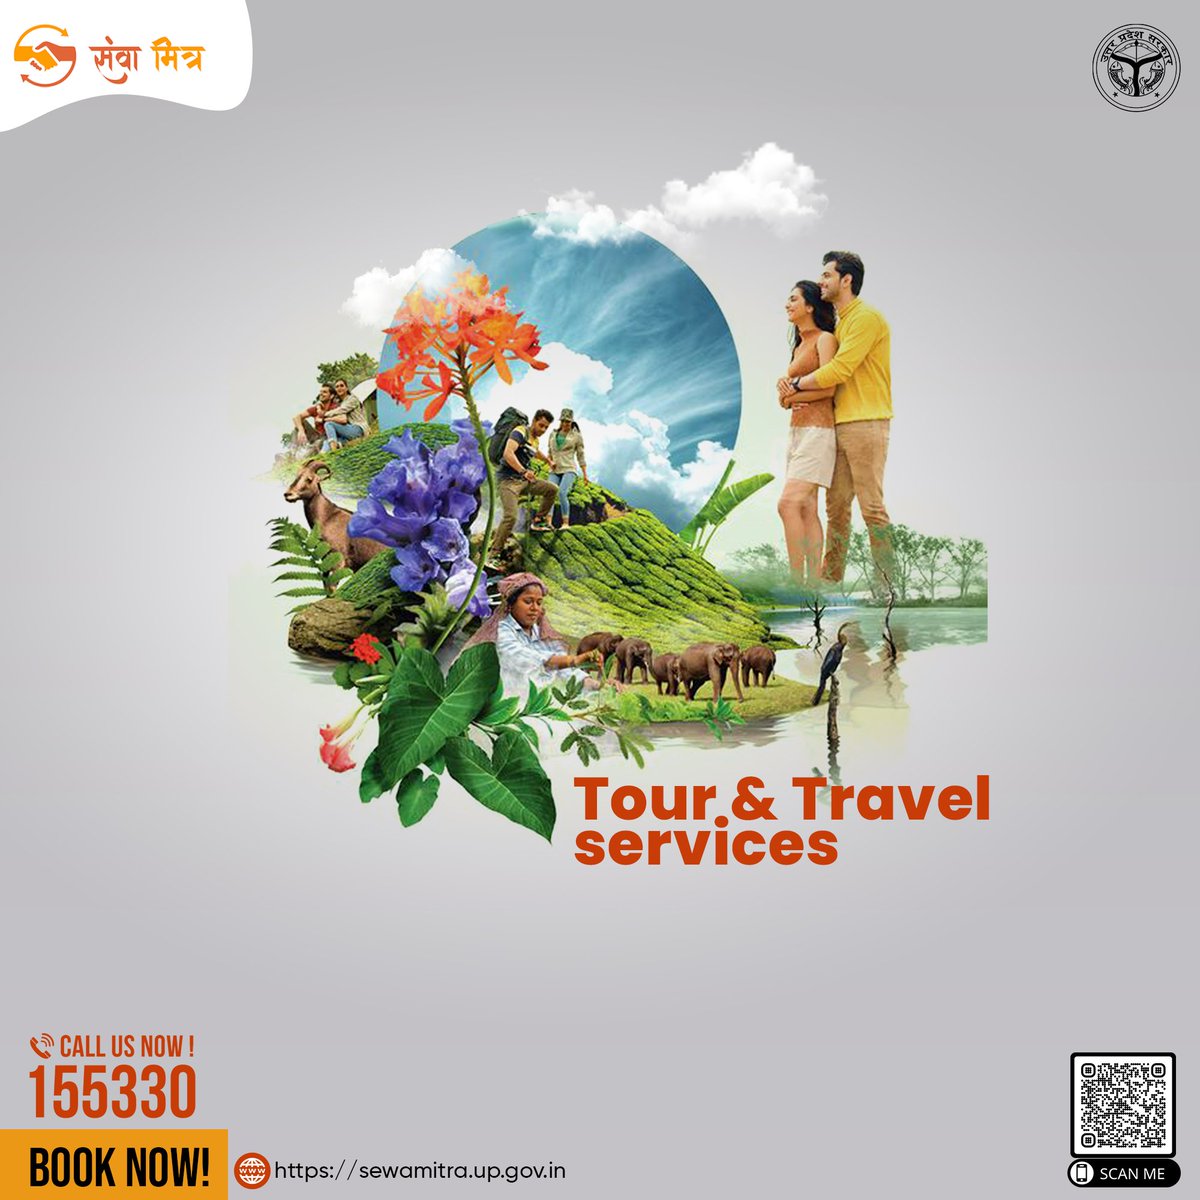 Call us now at 155330 for Tour and Travel Services.

#tourandtravel #tourandtravels #tourandtravelservices #PasooriNu #NFTkid #SmartCity #CWC23 #tourandtravelservice #tourandtravelservices #tour #tours #tourist #tourist #tourism #tourlife #travel #travelgram #travelblogger